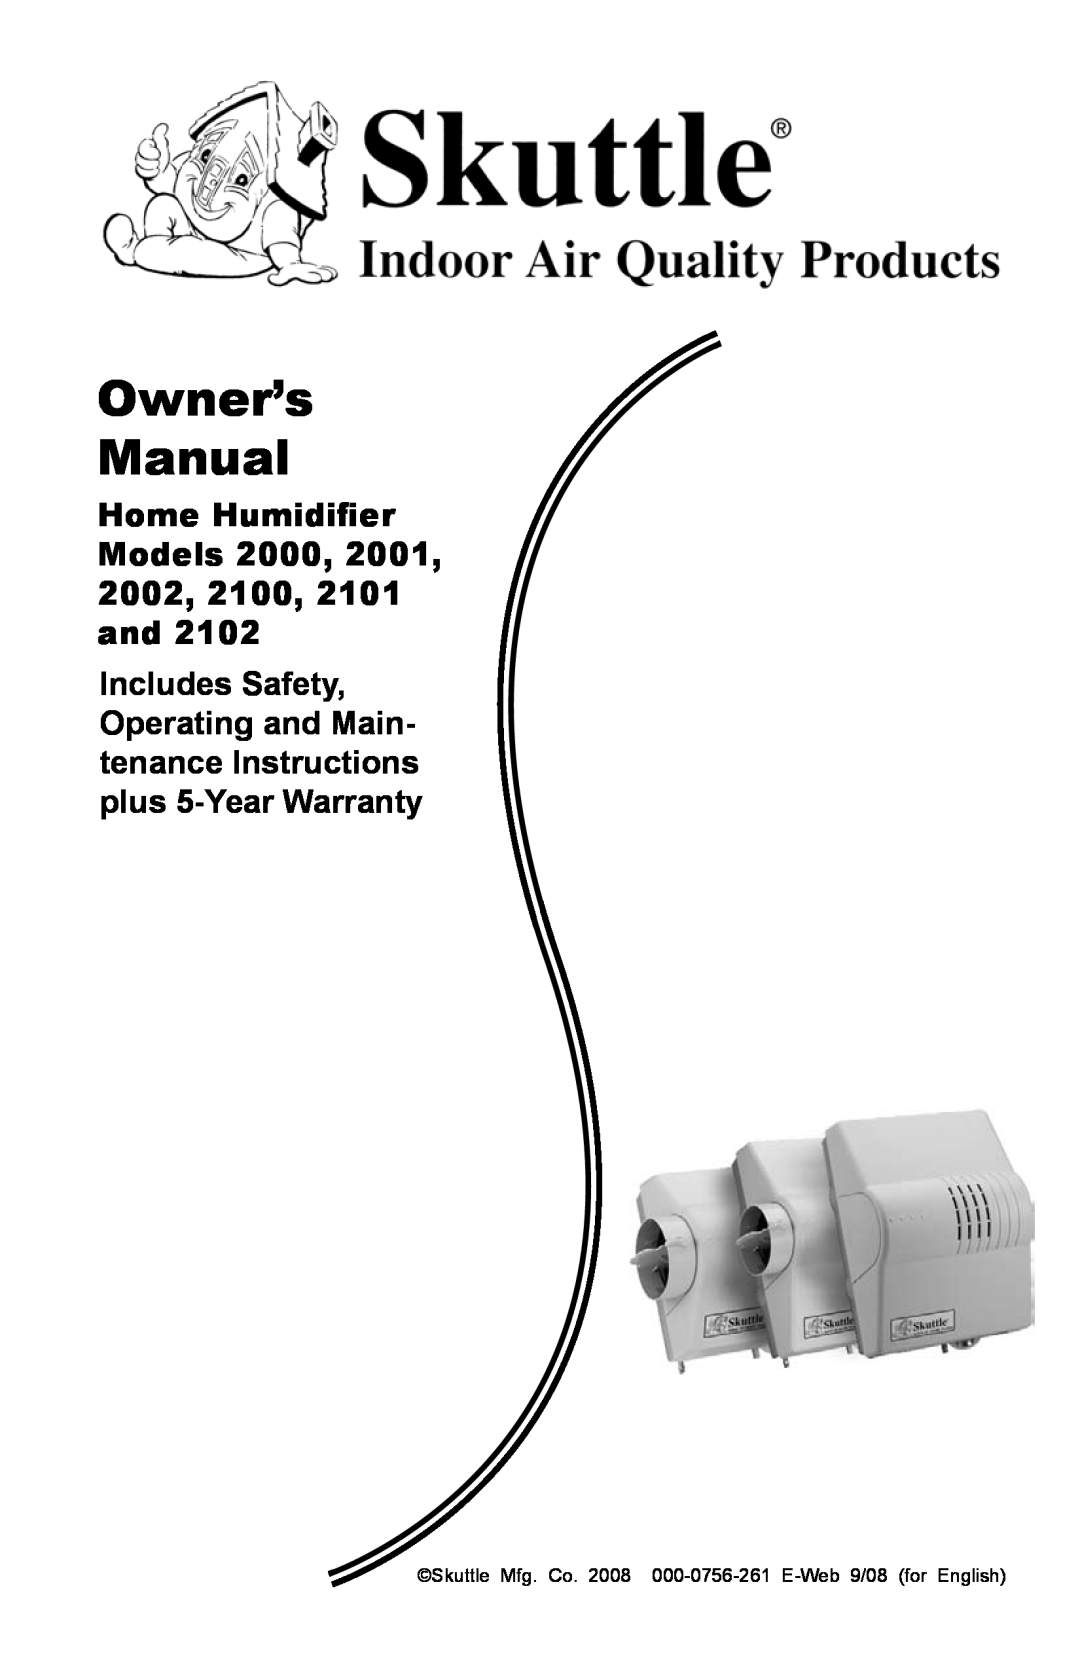 Skuttle Indoor Air Quality Products 2102, 2100 owner manual 